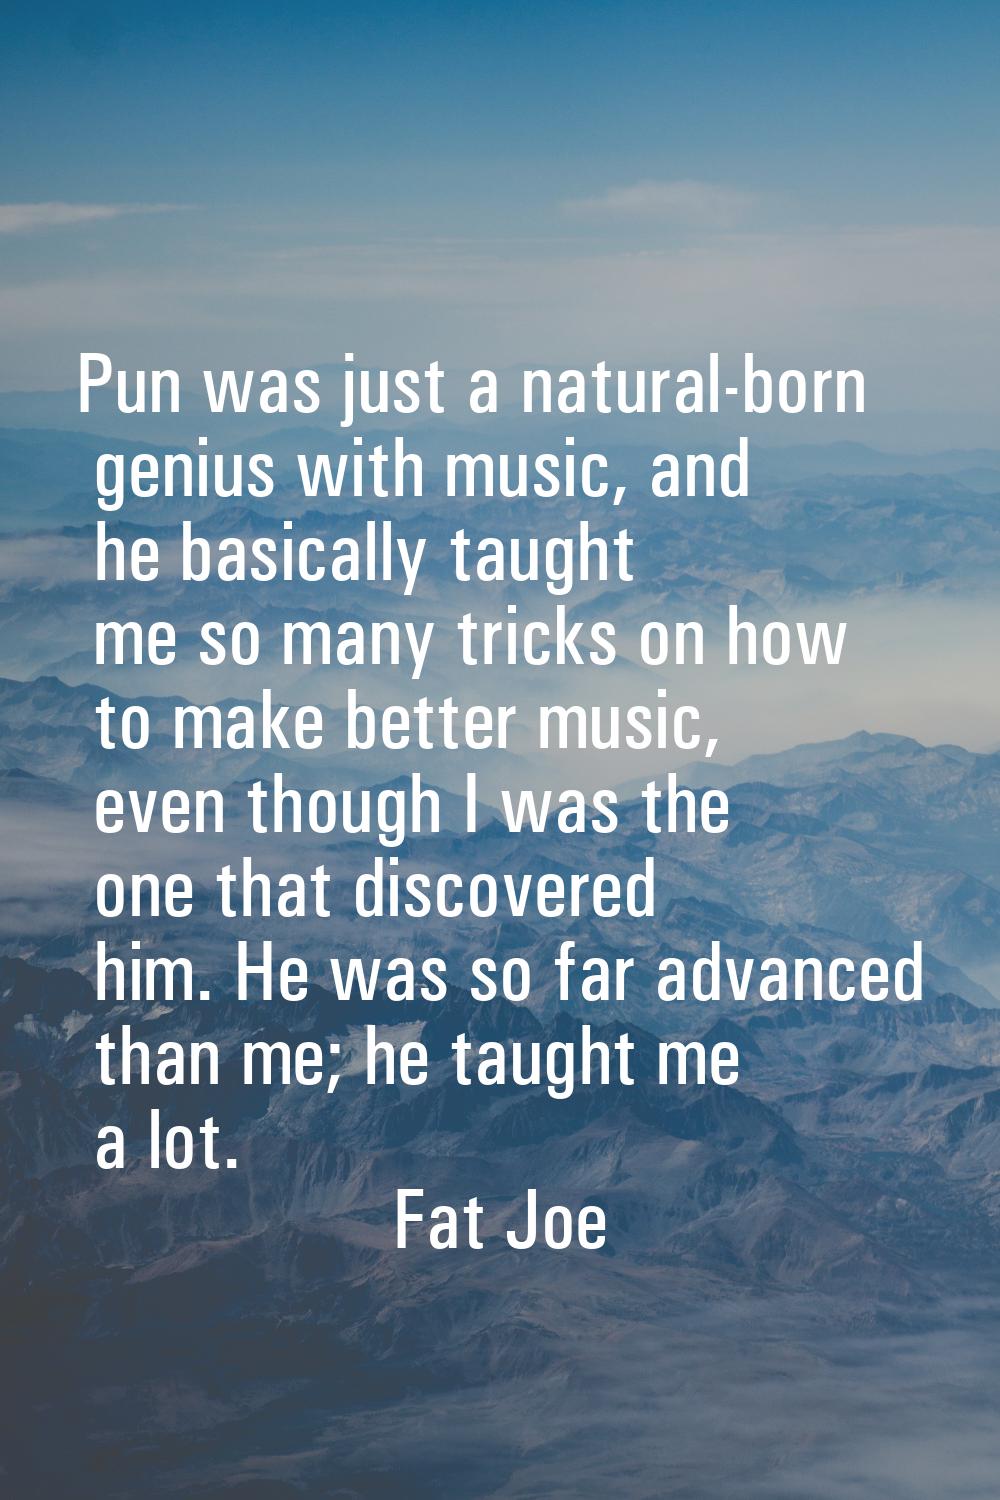 Pun was just a natural-born genius with music, and he basically taught me so many tricks on how to 